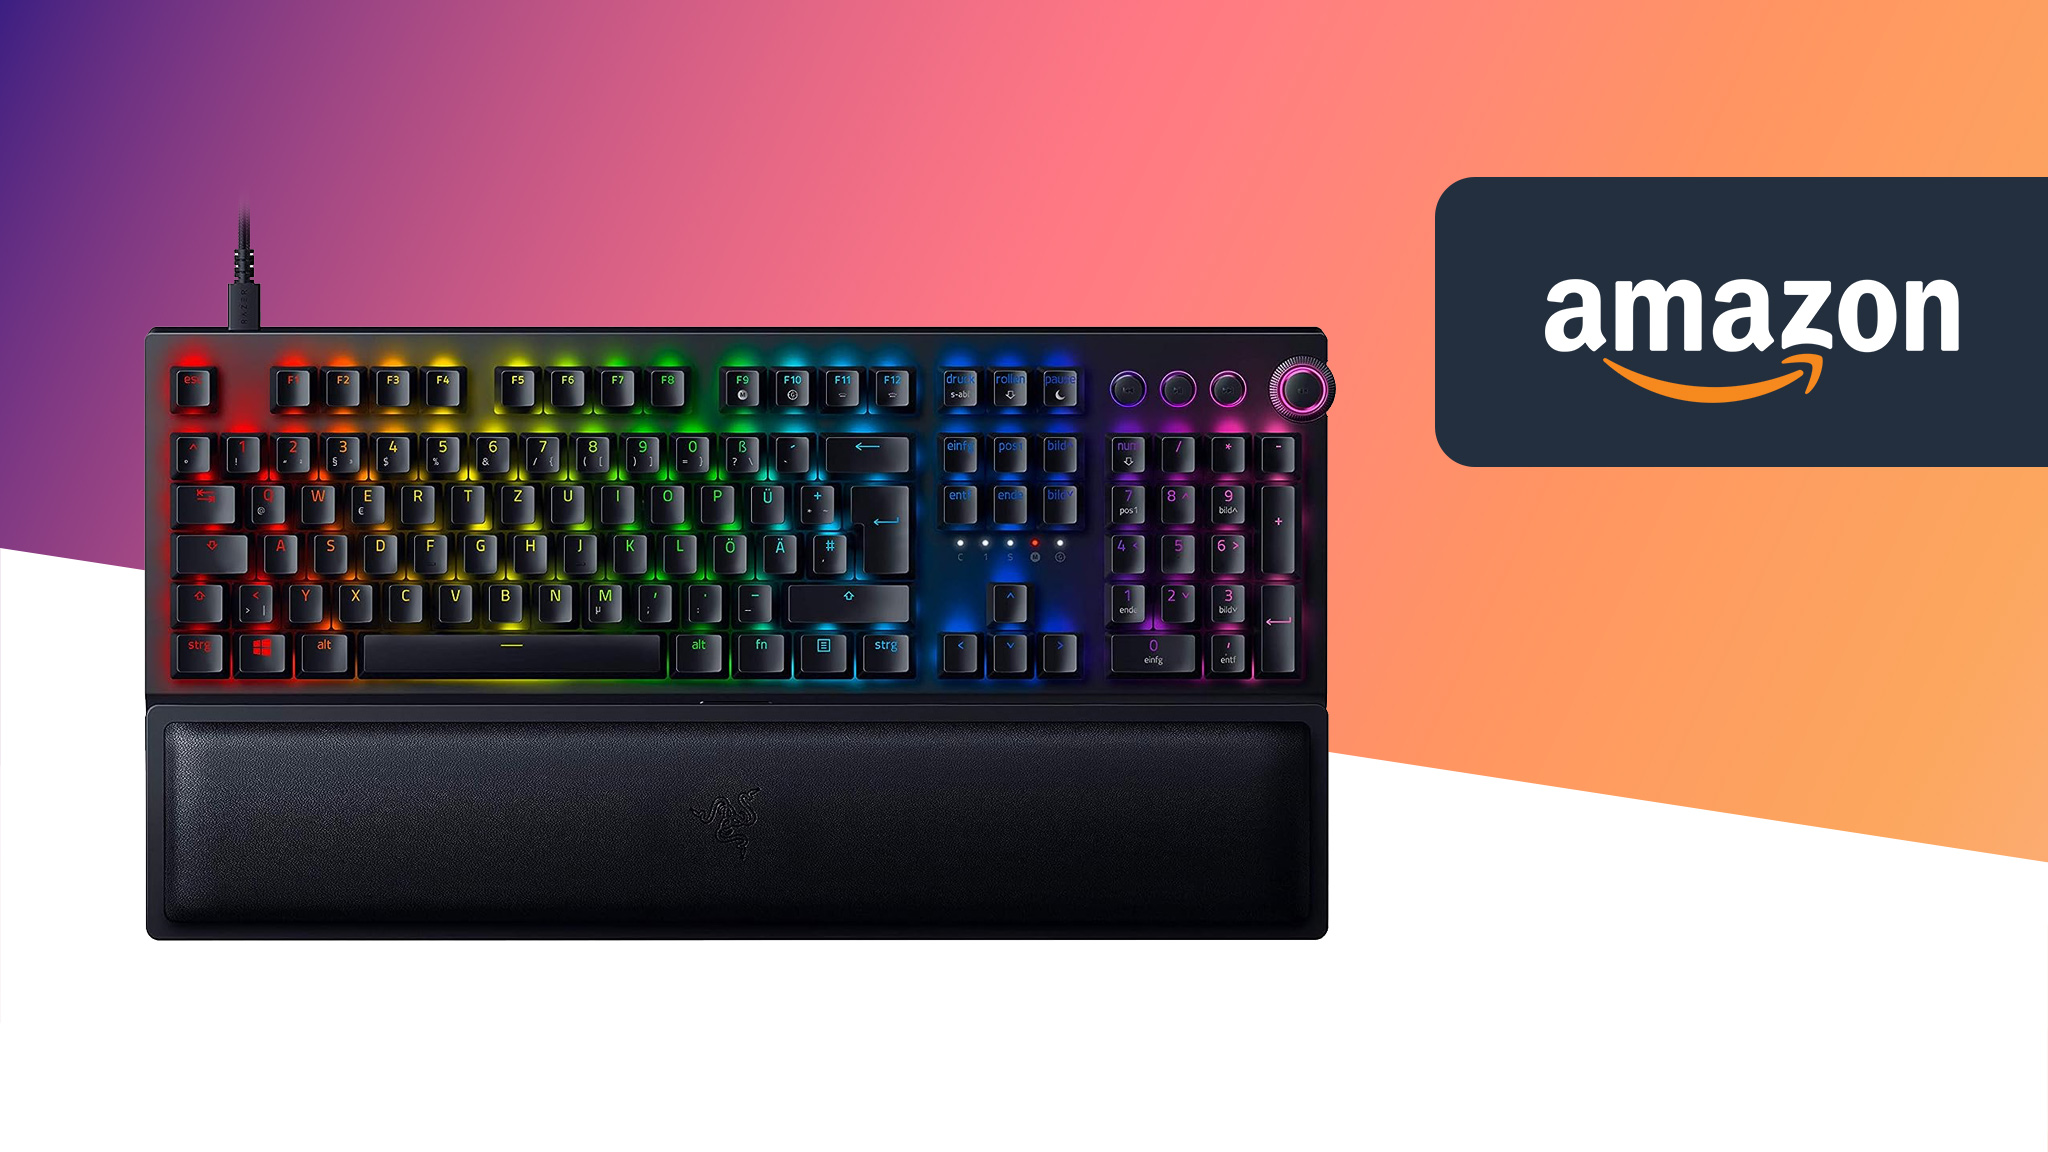 Razer’s coveted mechanical gaming keyboard is around €160